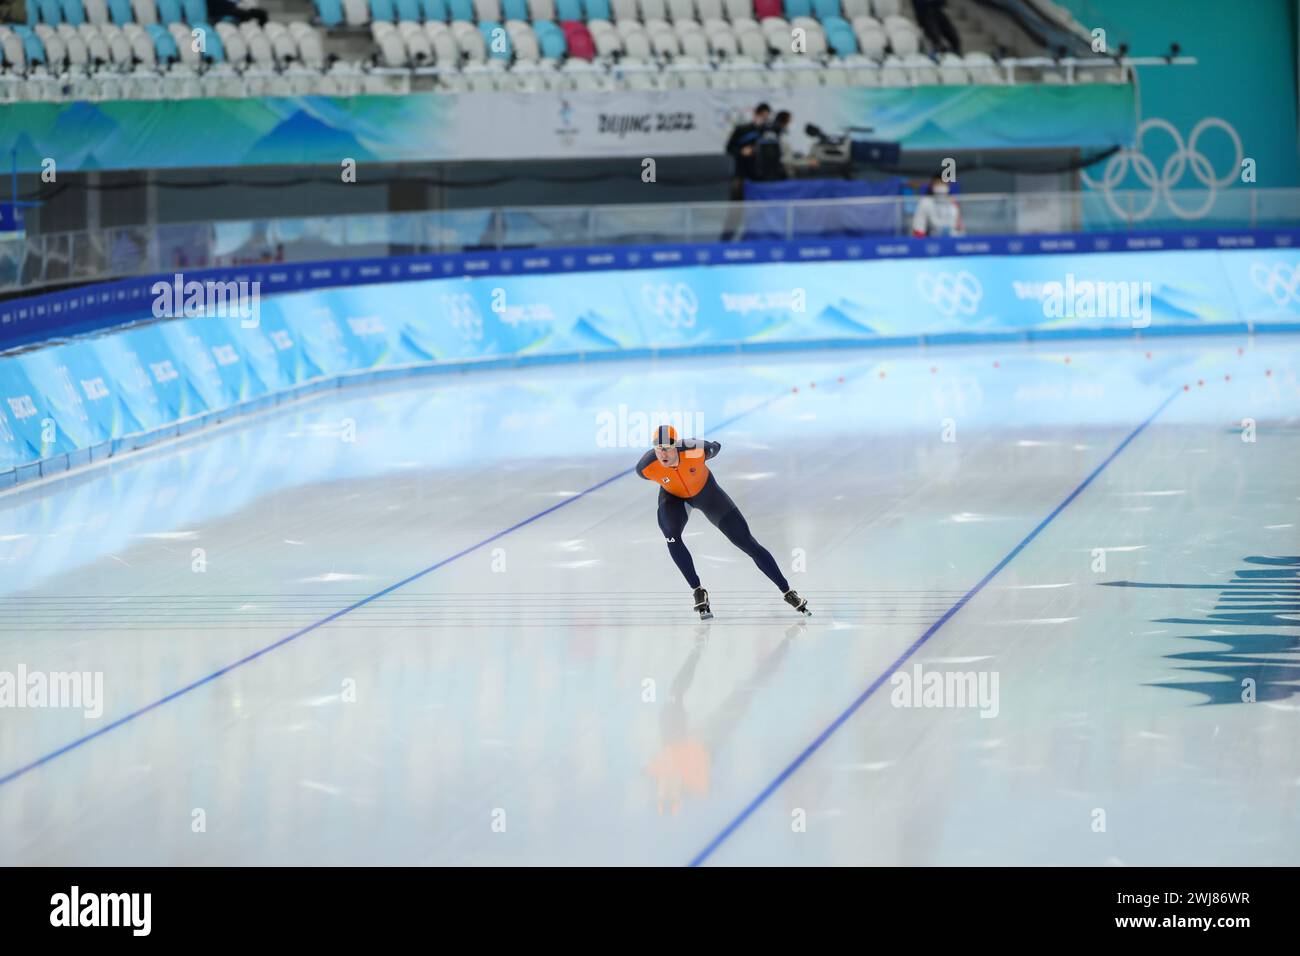 FEB 6, 2022 - Beijing, China: Sven Kramer of Team Netherlands competes in the Speed Skating Men's 5,000m Final at the Beijing 2022 Winter Olympic Game Stock Photo